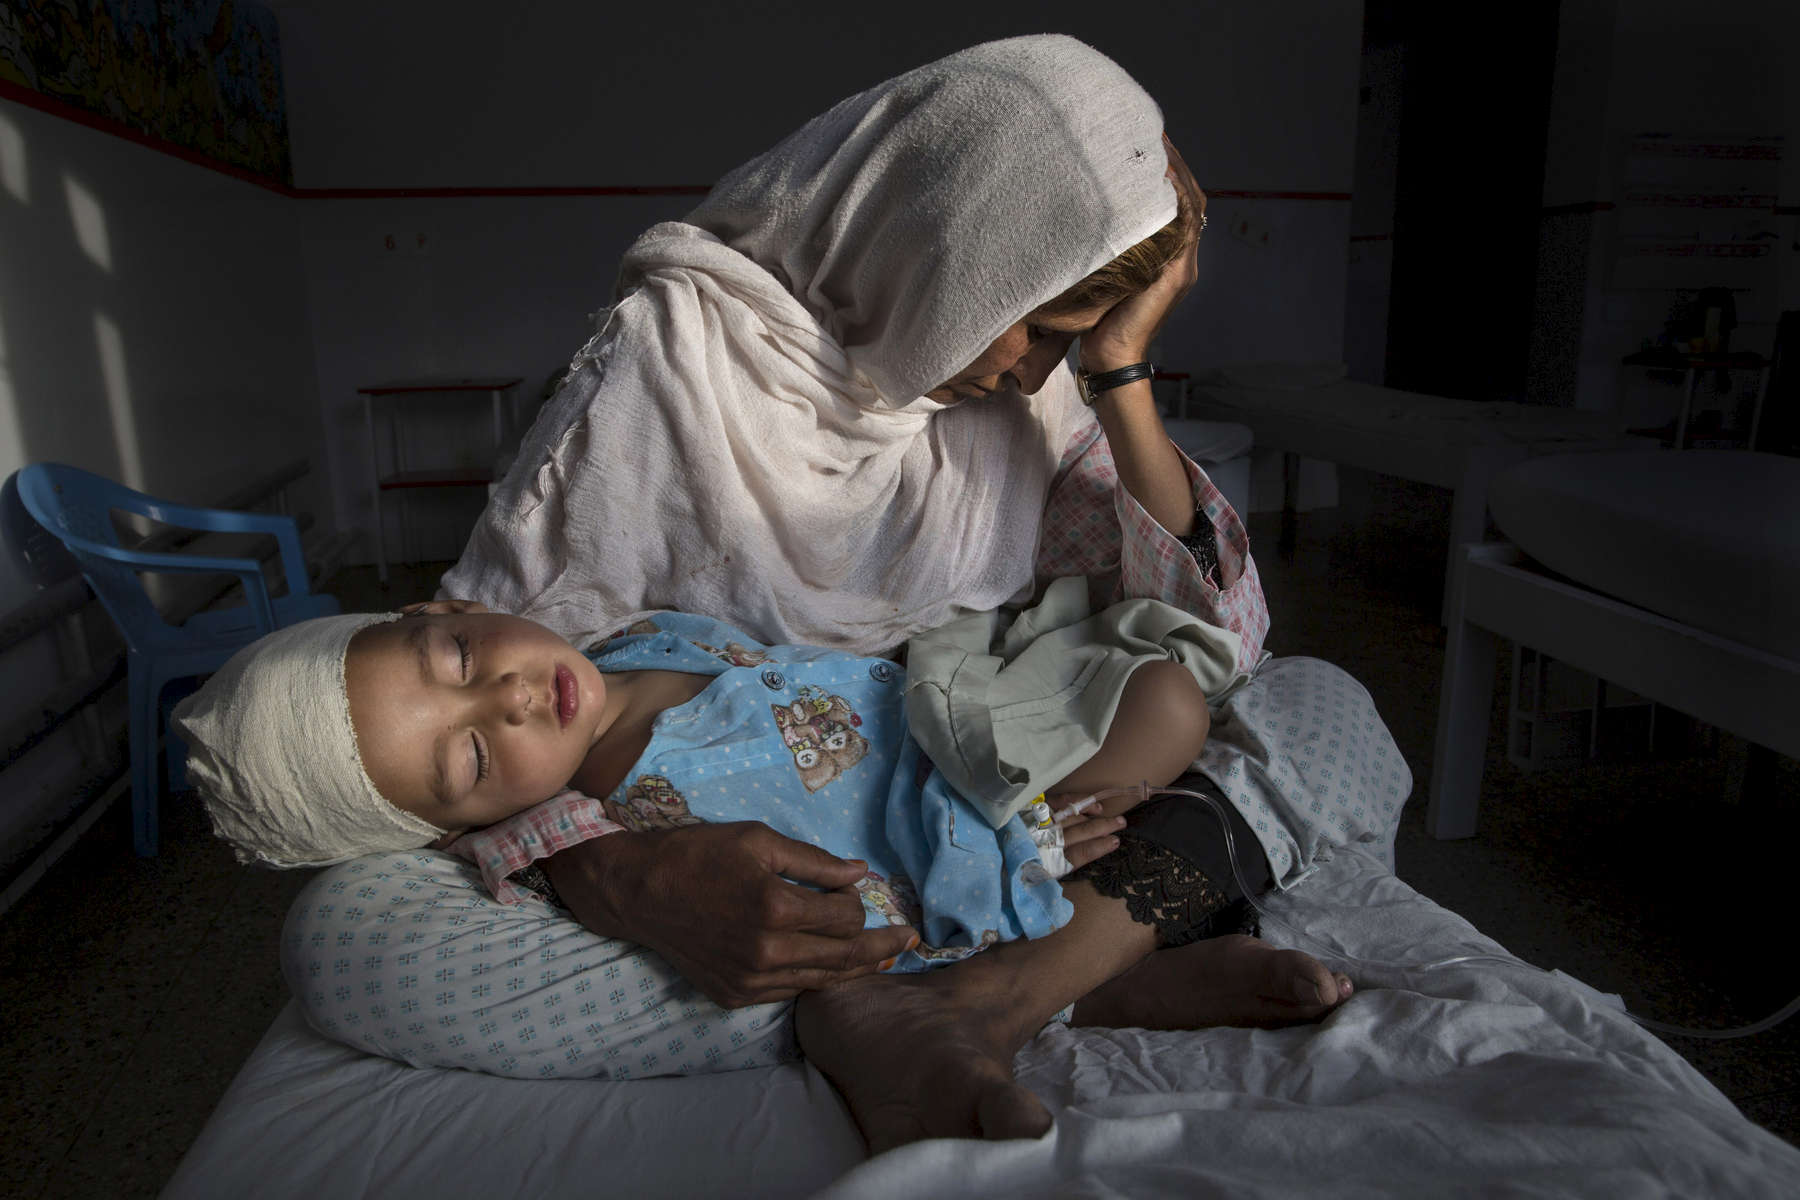 KABUL, AFGHANISTAN -MARCH 29, 2016:  At the Emergency hospital Najiba holds her nephew Shabir, age 2,  who was injured from a bomb blast which killed his sister in Kabul on March 29, 2016. Najiba had to stay with the children as their mother buried her daughter. Afghan civilians are at greater risk today than at any time since Taliban rule. According to UN statistics, in the first half of 2016 at least 1,600 people had died, and more than 3,500 people were injured, a 4 per cent increase in overall civilian causalities compared to the same period last year. The upsurge in violence has had devastating consequences for civilians, with suicide bombings and targeted attacks by the Taliban and other insurgents causing 70 percent of all civilian casualties.  